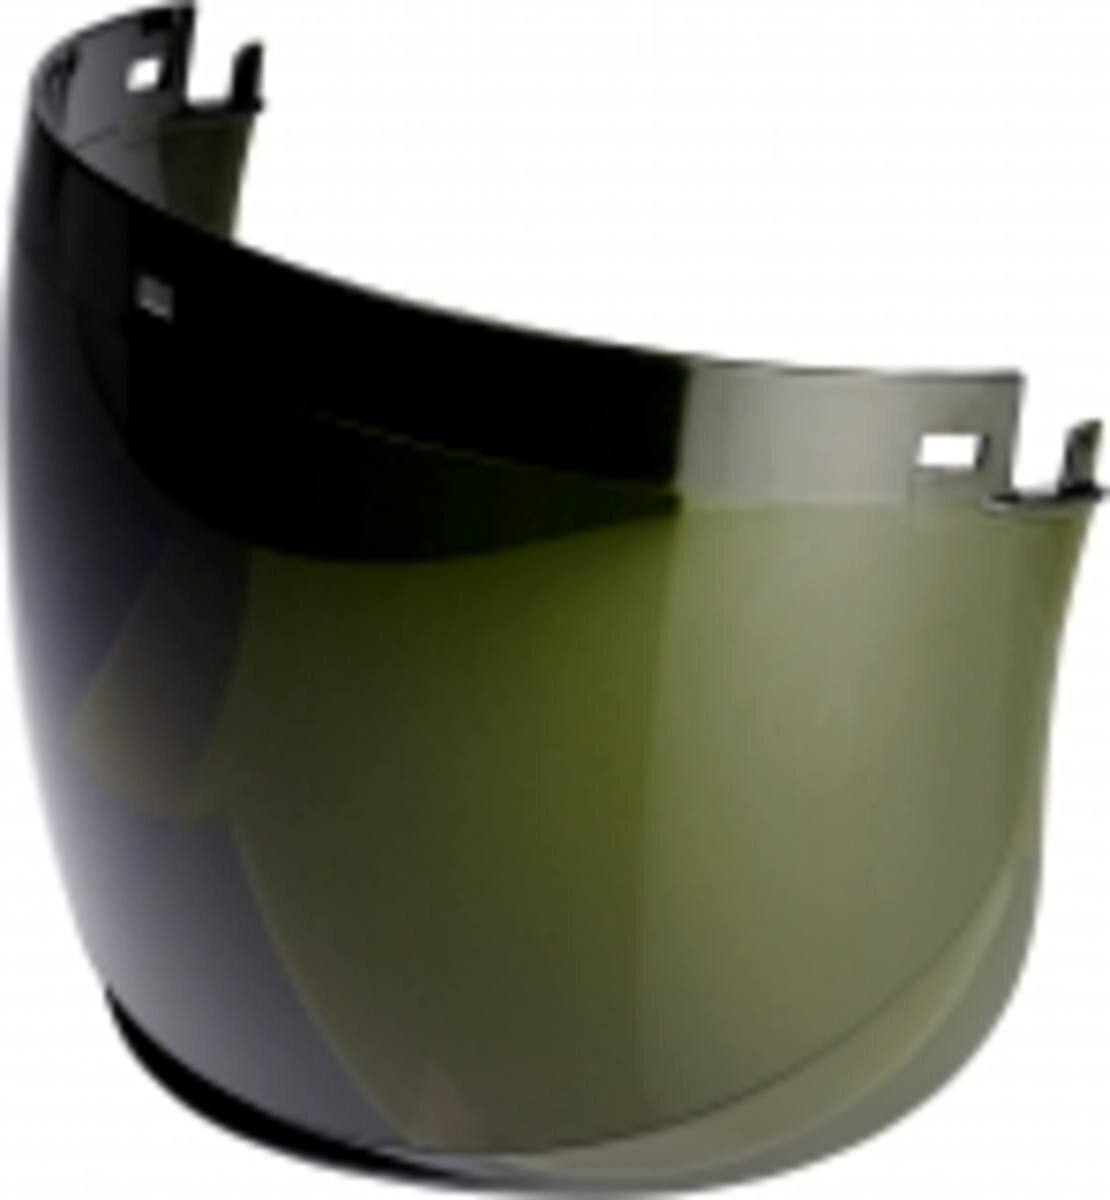 3M Visor 5E-11 clear visor polycarbonate green IR 5.0 extremely impact-resistant thickness: 1.5mm, weight: 138g available separately: V5 holder for 3M safety helmets